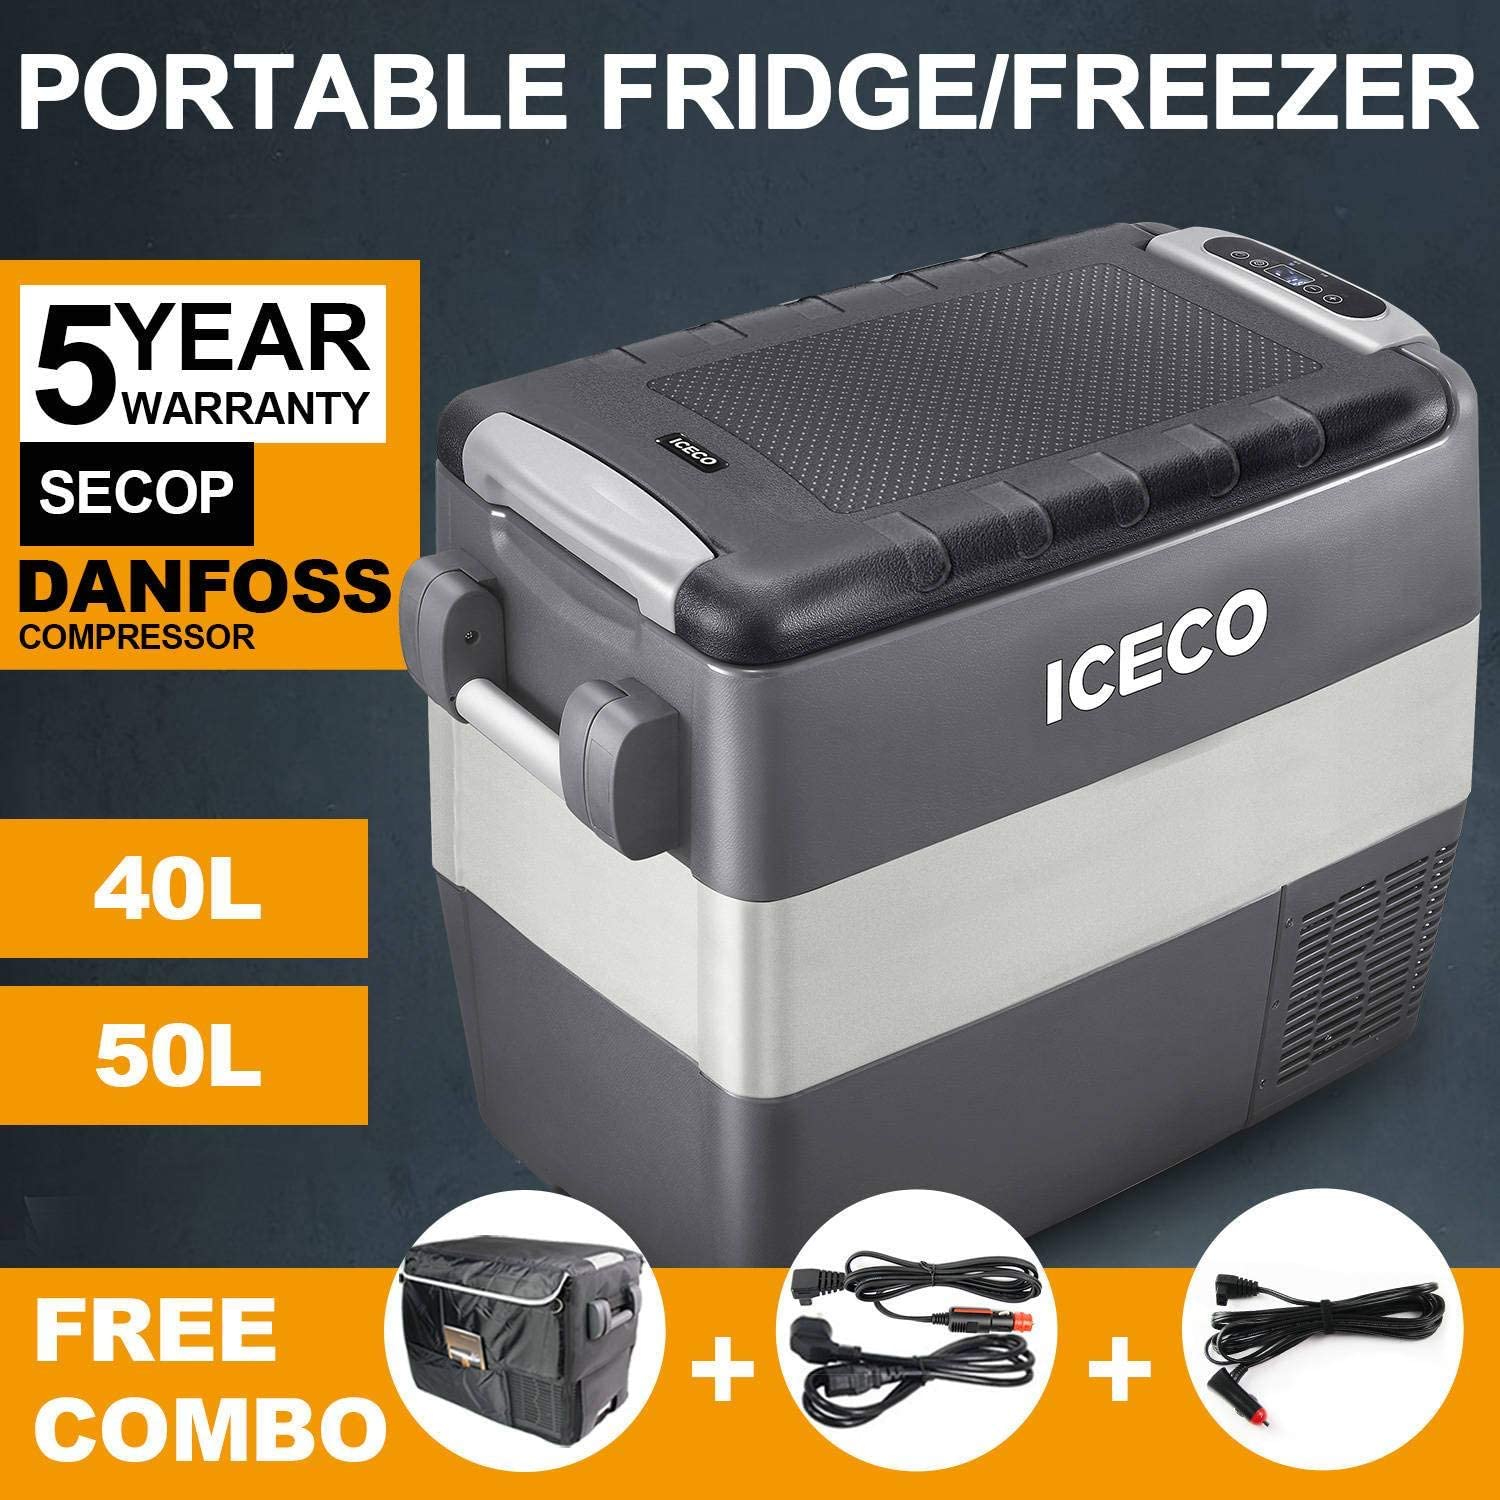 10 Best Portable Freezer 2022 Review For Car Freezers, Camping, RVs, Truck, Boats Electric Coolers All In One Cooling Gear Lab: Any Refrigerators Air Conditioners Freezers Ice Makers Coolers Fans Reviewed And Compared.